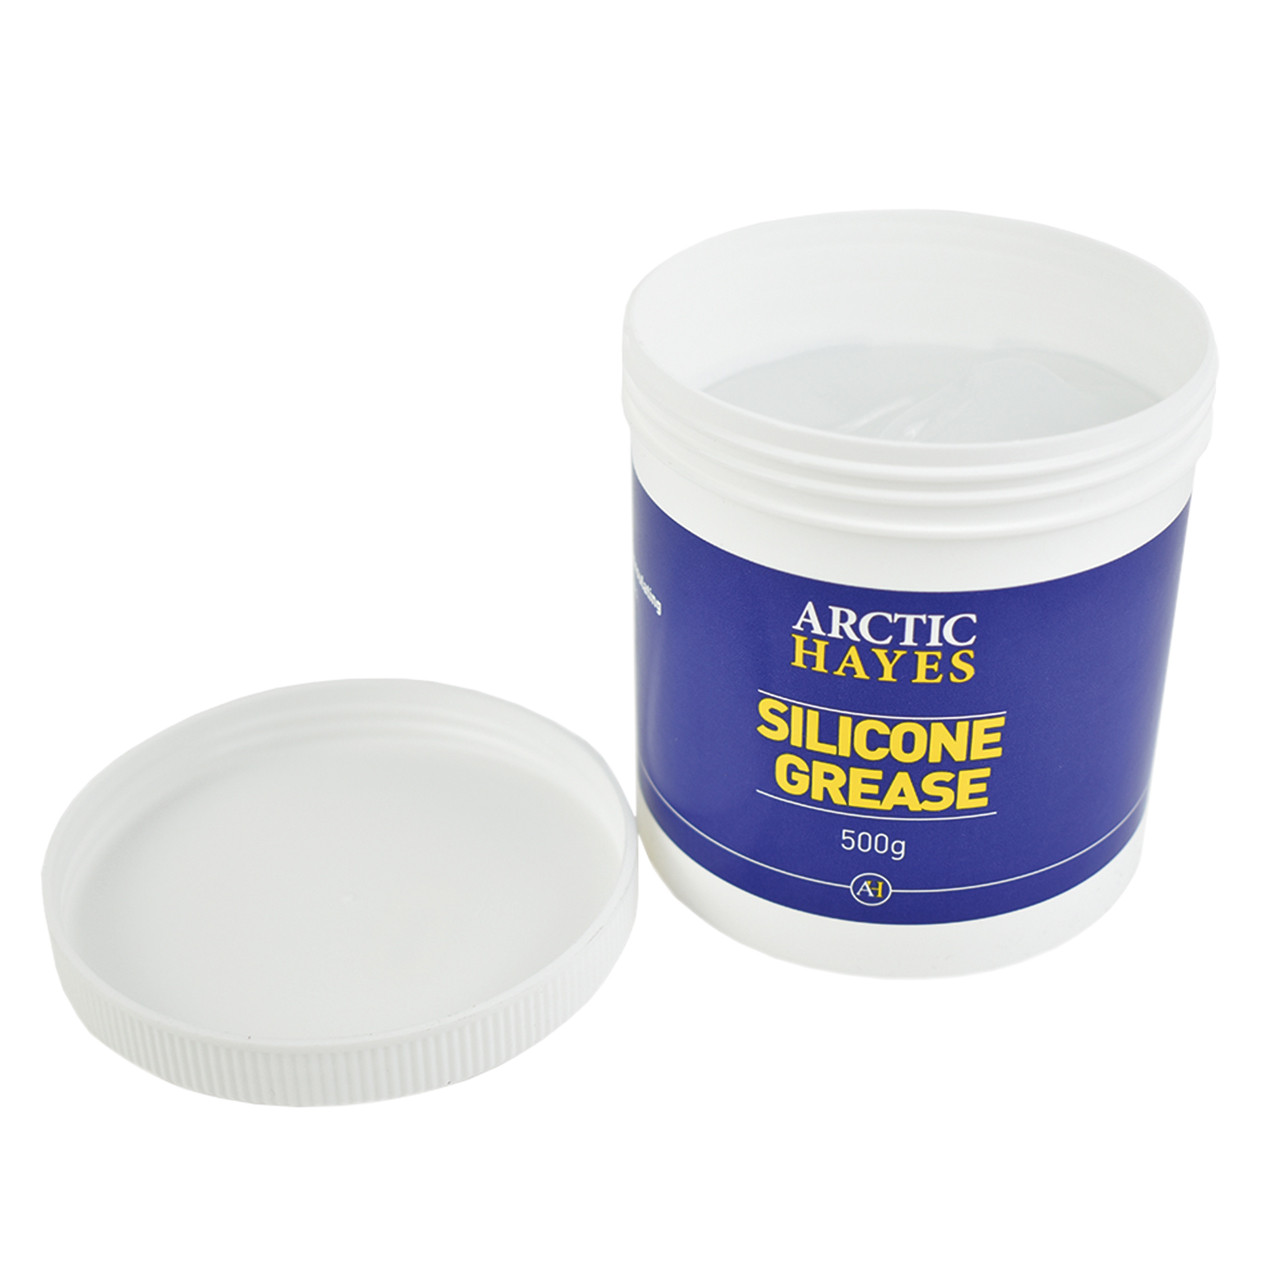 Photograph of Arctic Hayes Silicone Grease 500g Tub